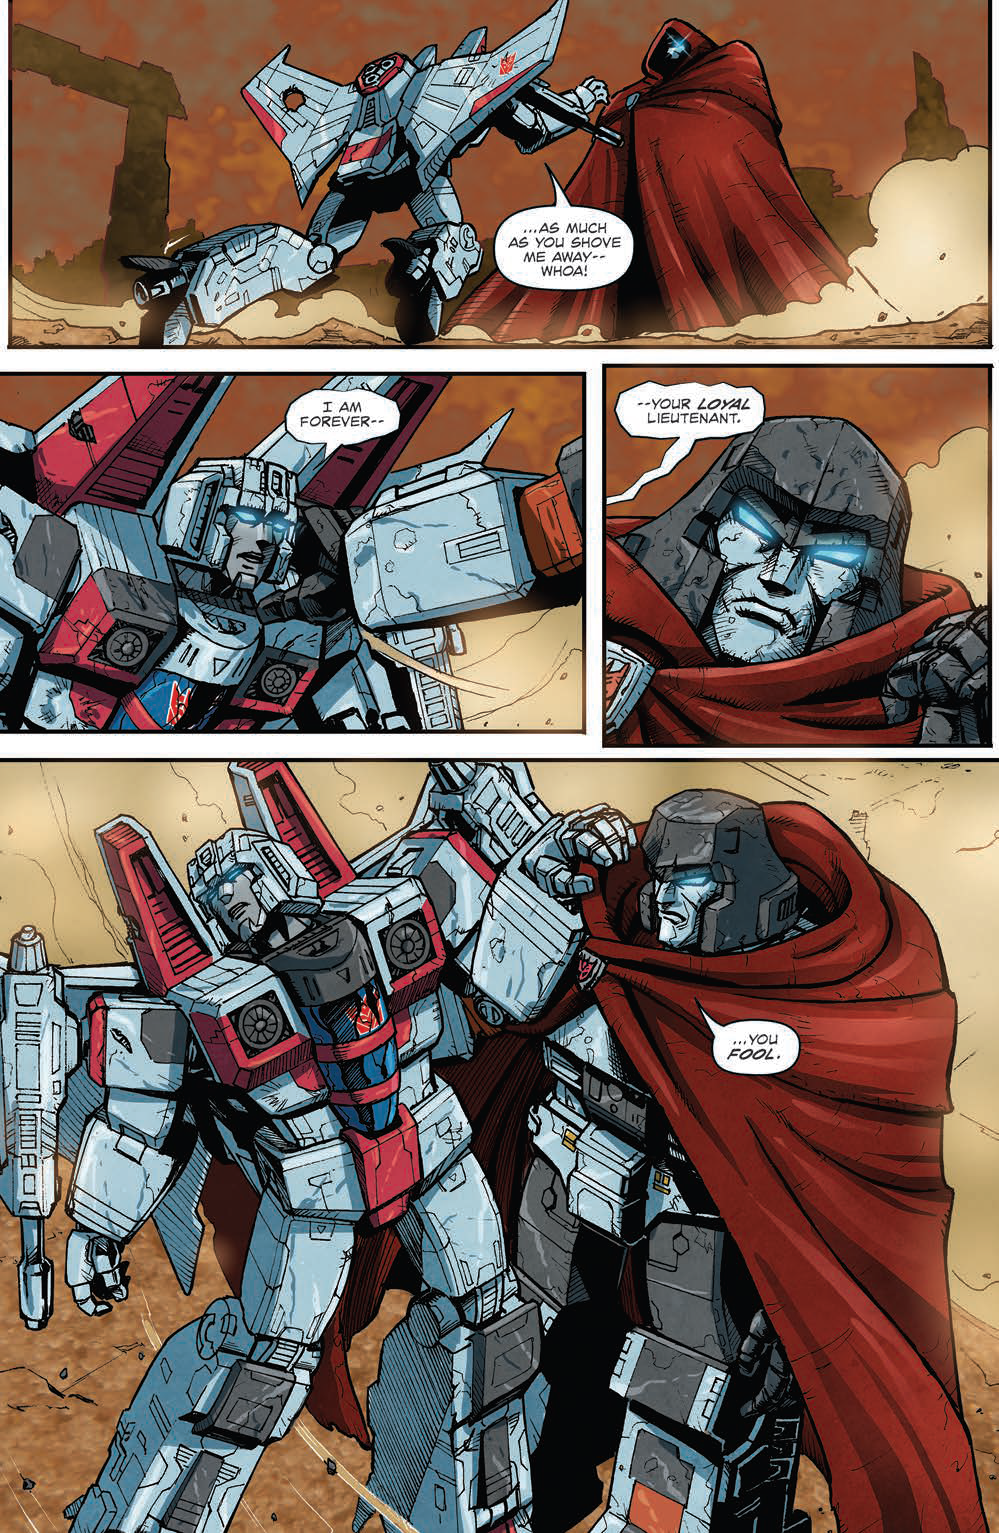 Five Page Preview of IDW Transformers: Shattered Glass #2